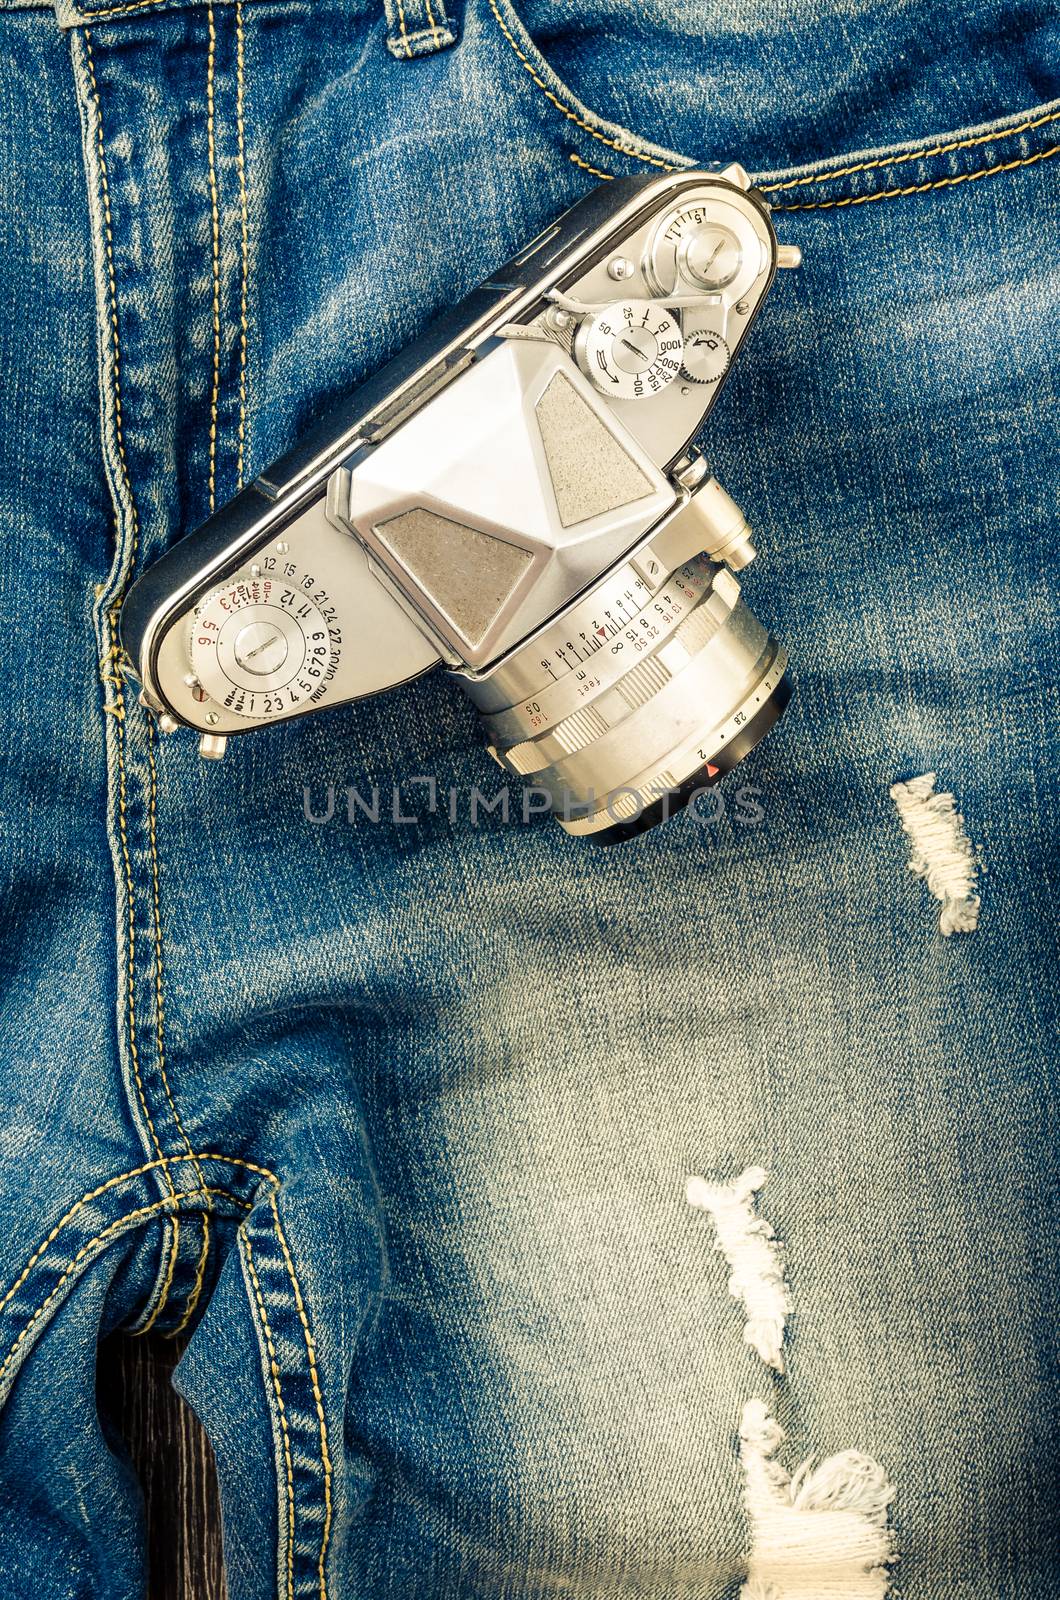 Close-up detail of nice vintage jeans with classic camera